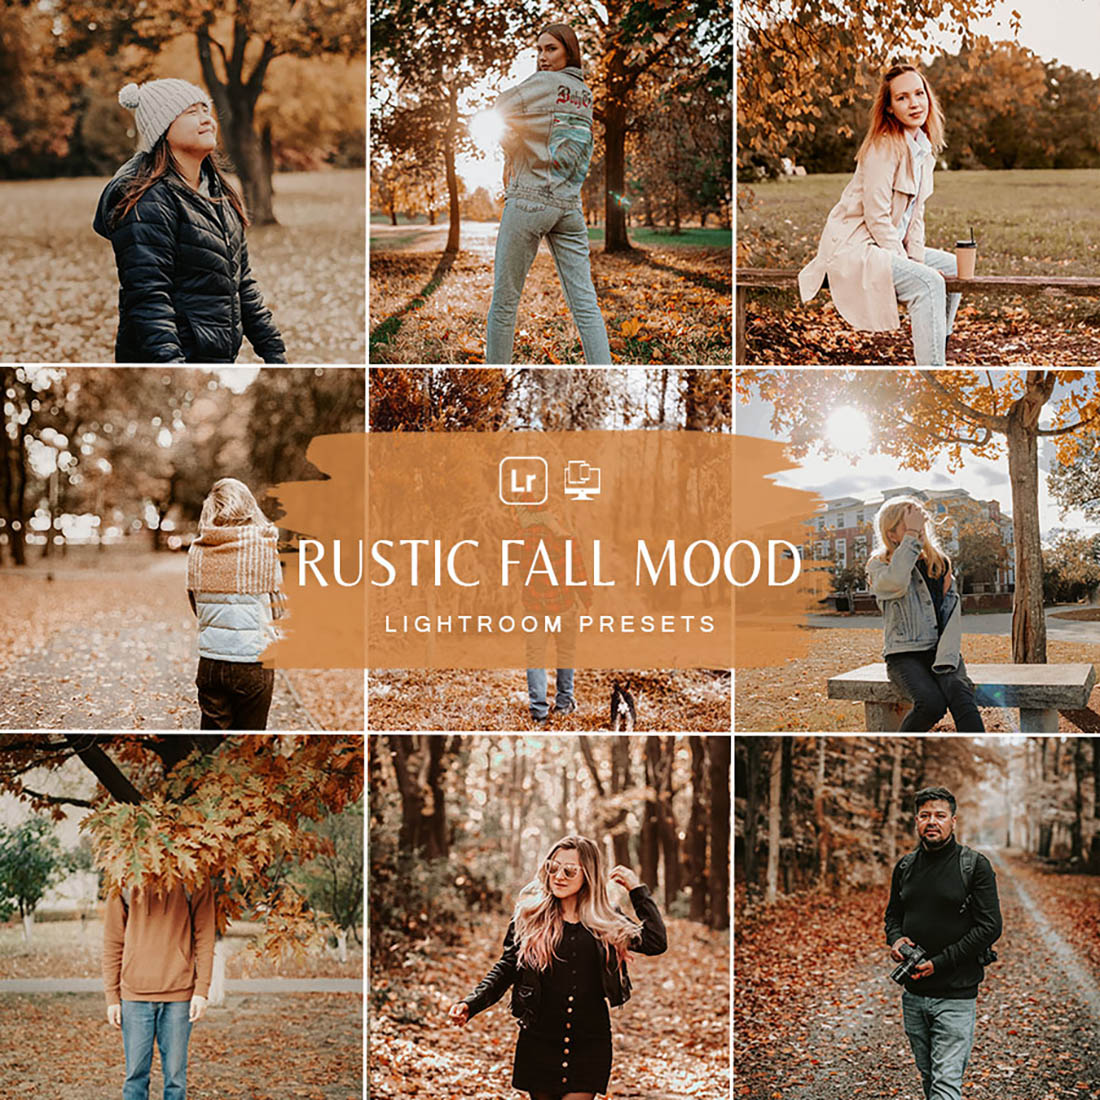 25 Rustic Fall Moody Lightroom Desktop and Mobile Presets cover image.